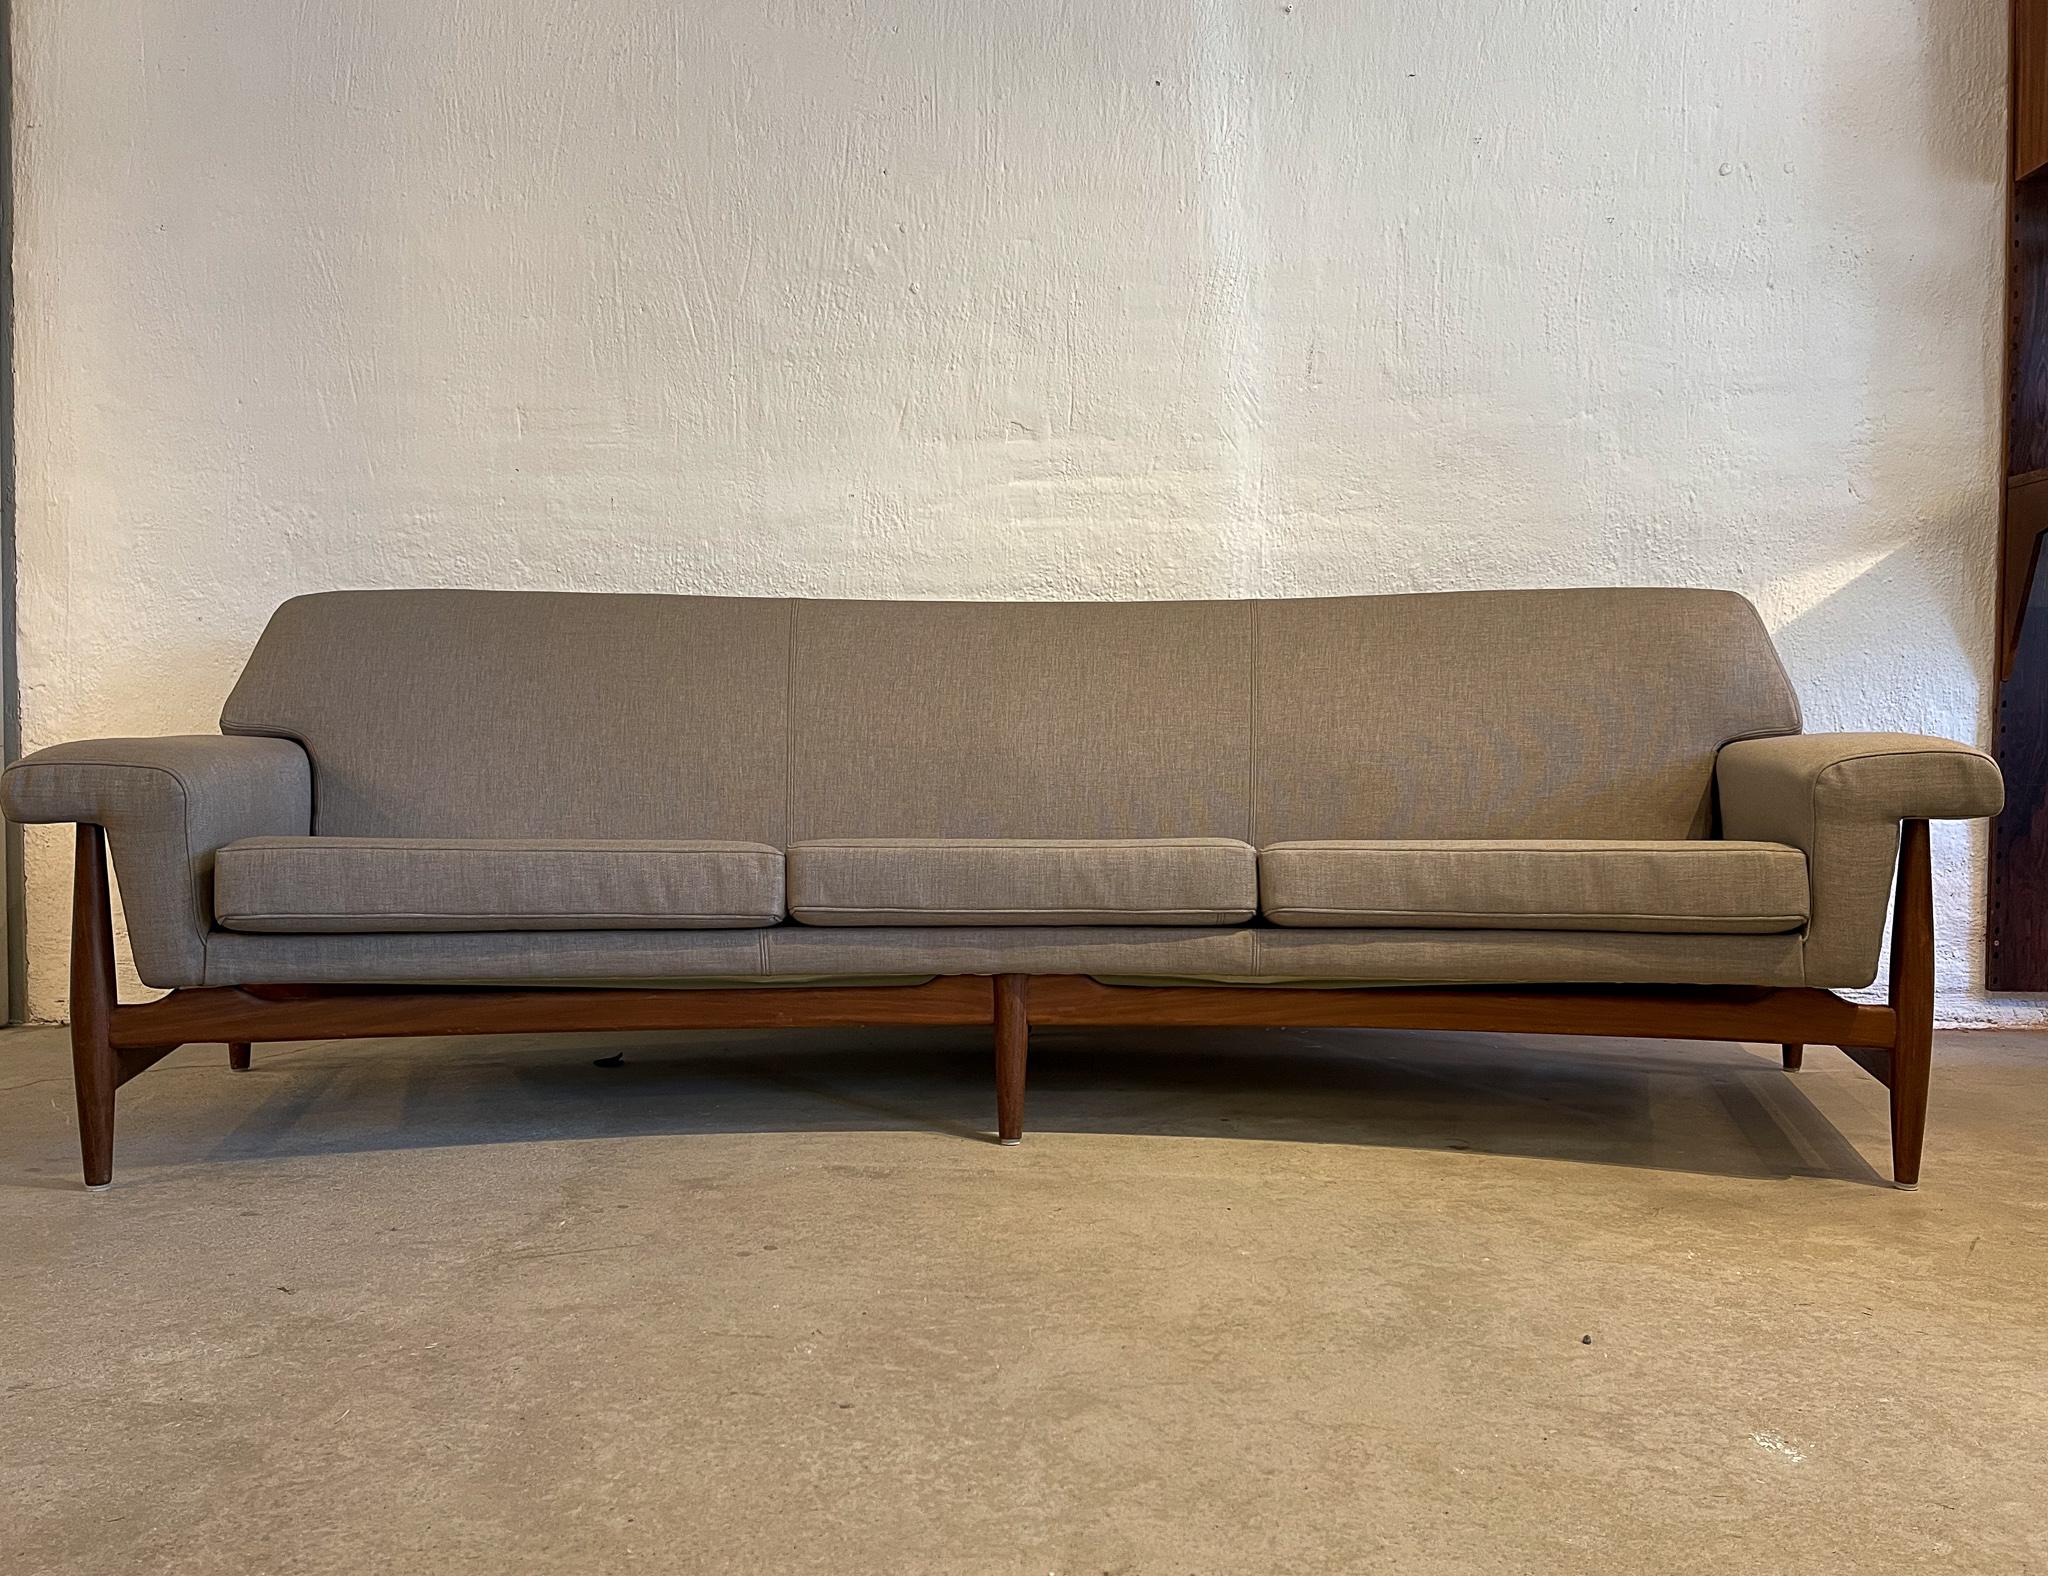 This Mid-Century Modern sofa was designed by famous creator and designer Johannes Andersen and manufactured at Trensum Møbelfabrik Sweden during the late 1950s. This curved sofa with all new quality upholstery textile and its solid teak frame gives